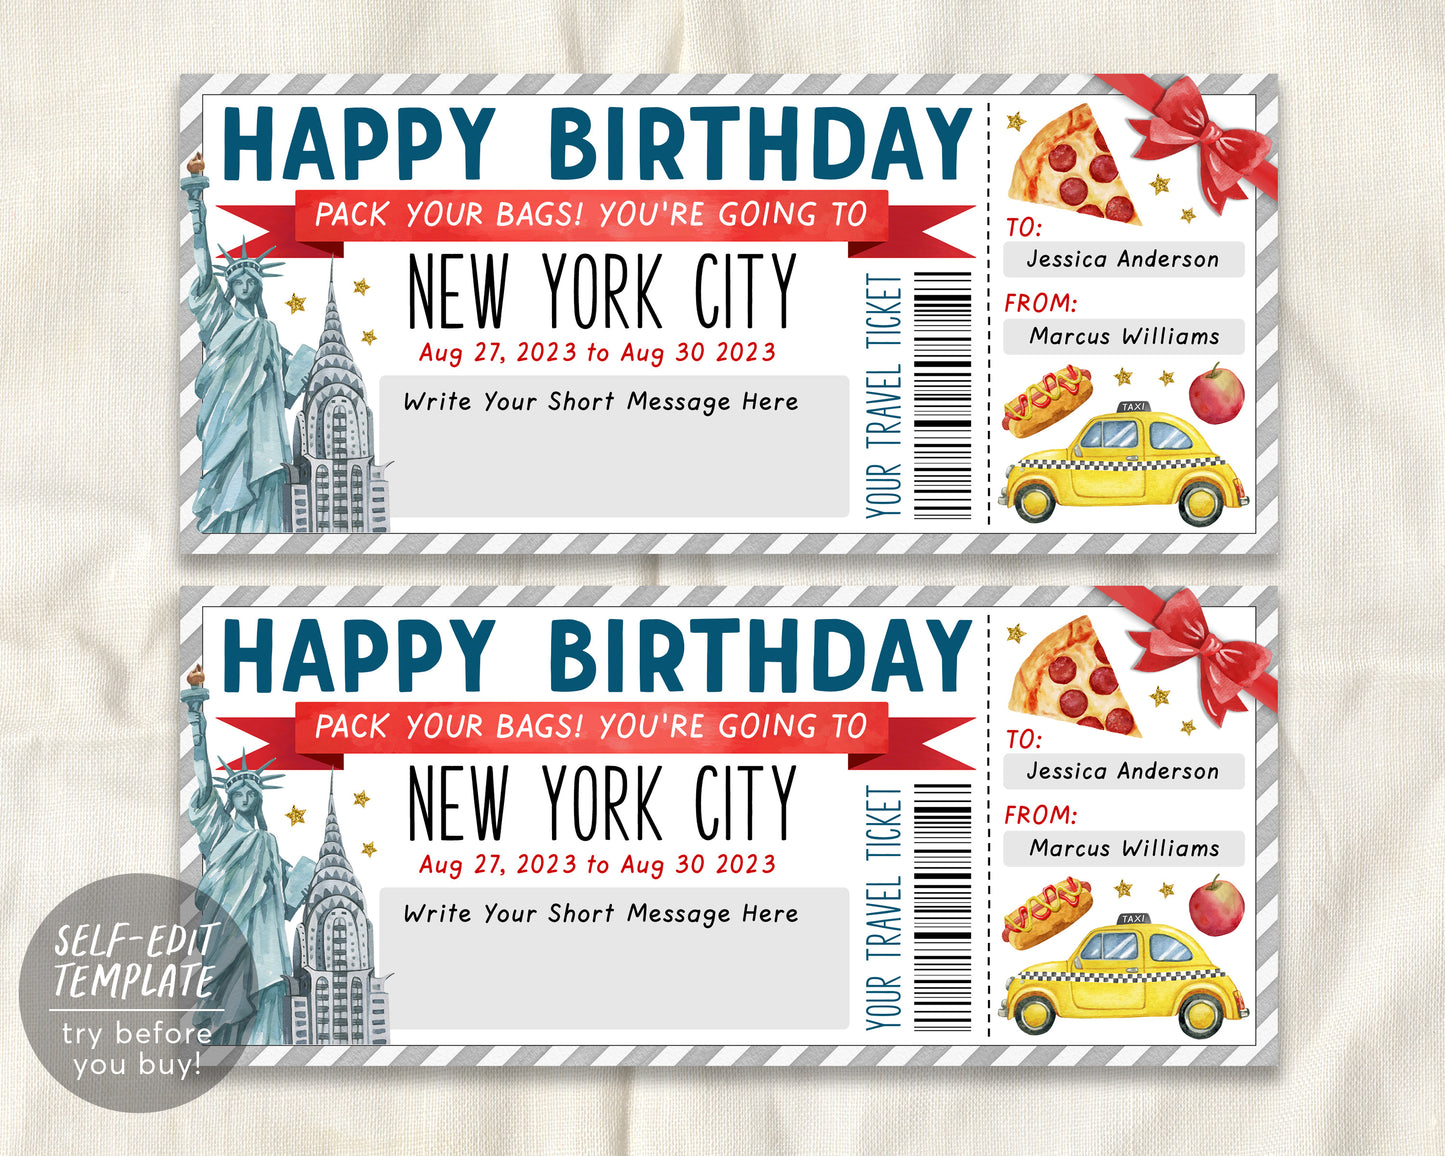 New York City Trip Ticket Editable Template, Birthday Anniversary Surprise Travel Vacation Gift Certificate, NYC Trip Reveal, Pack Your Bags